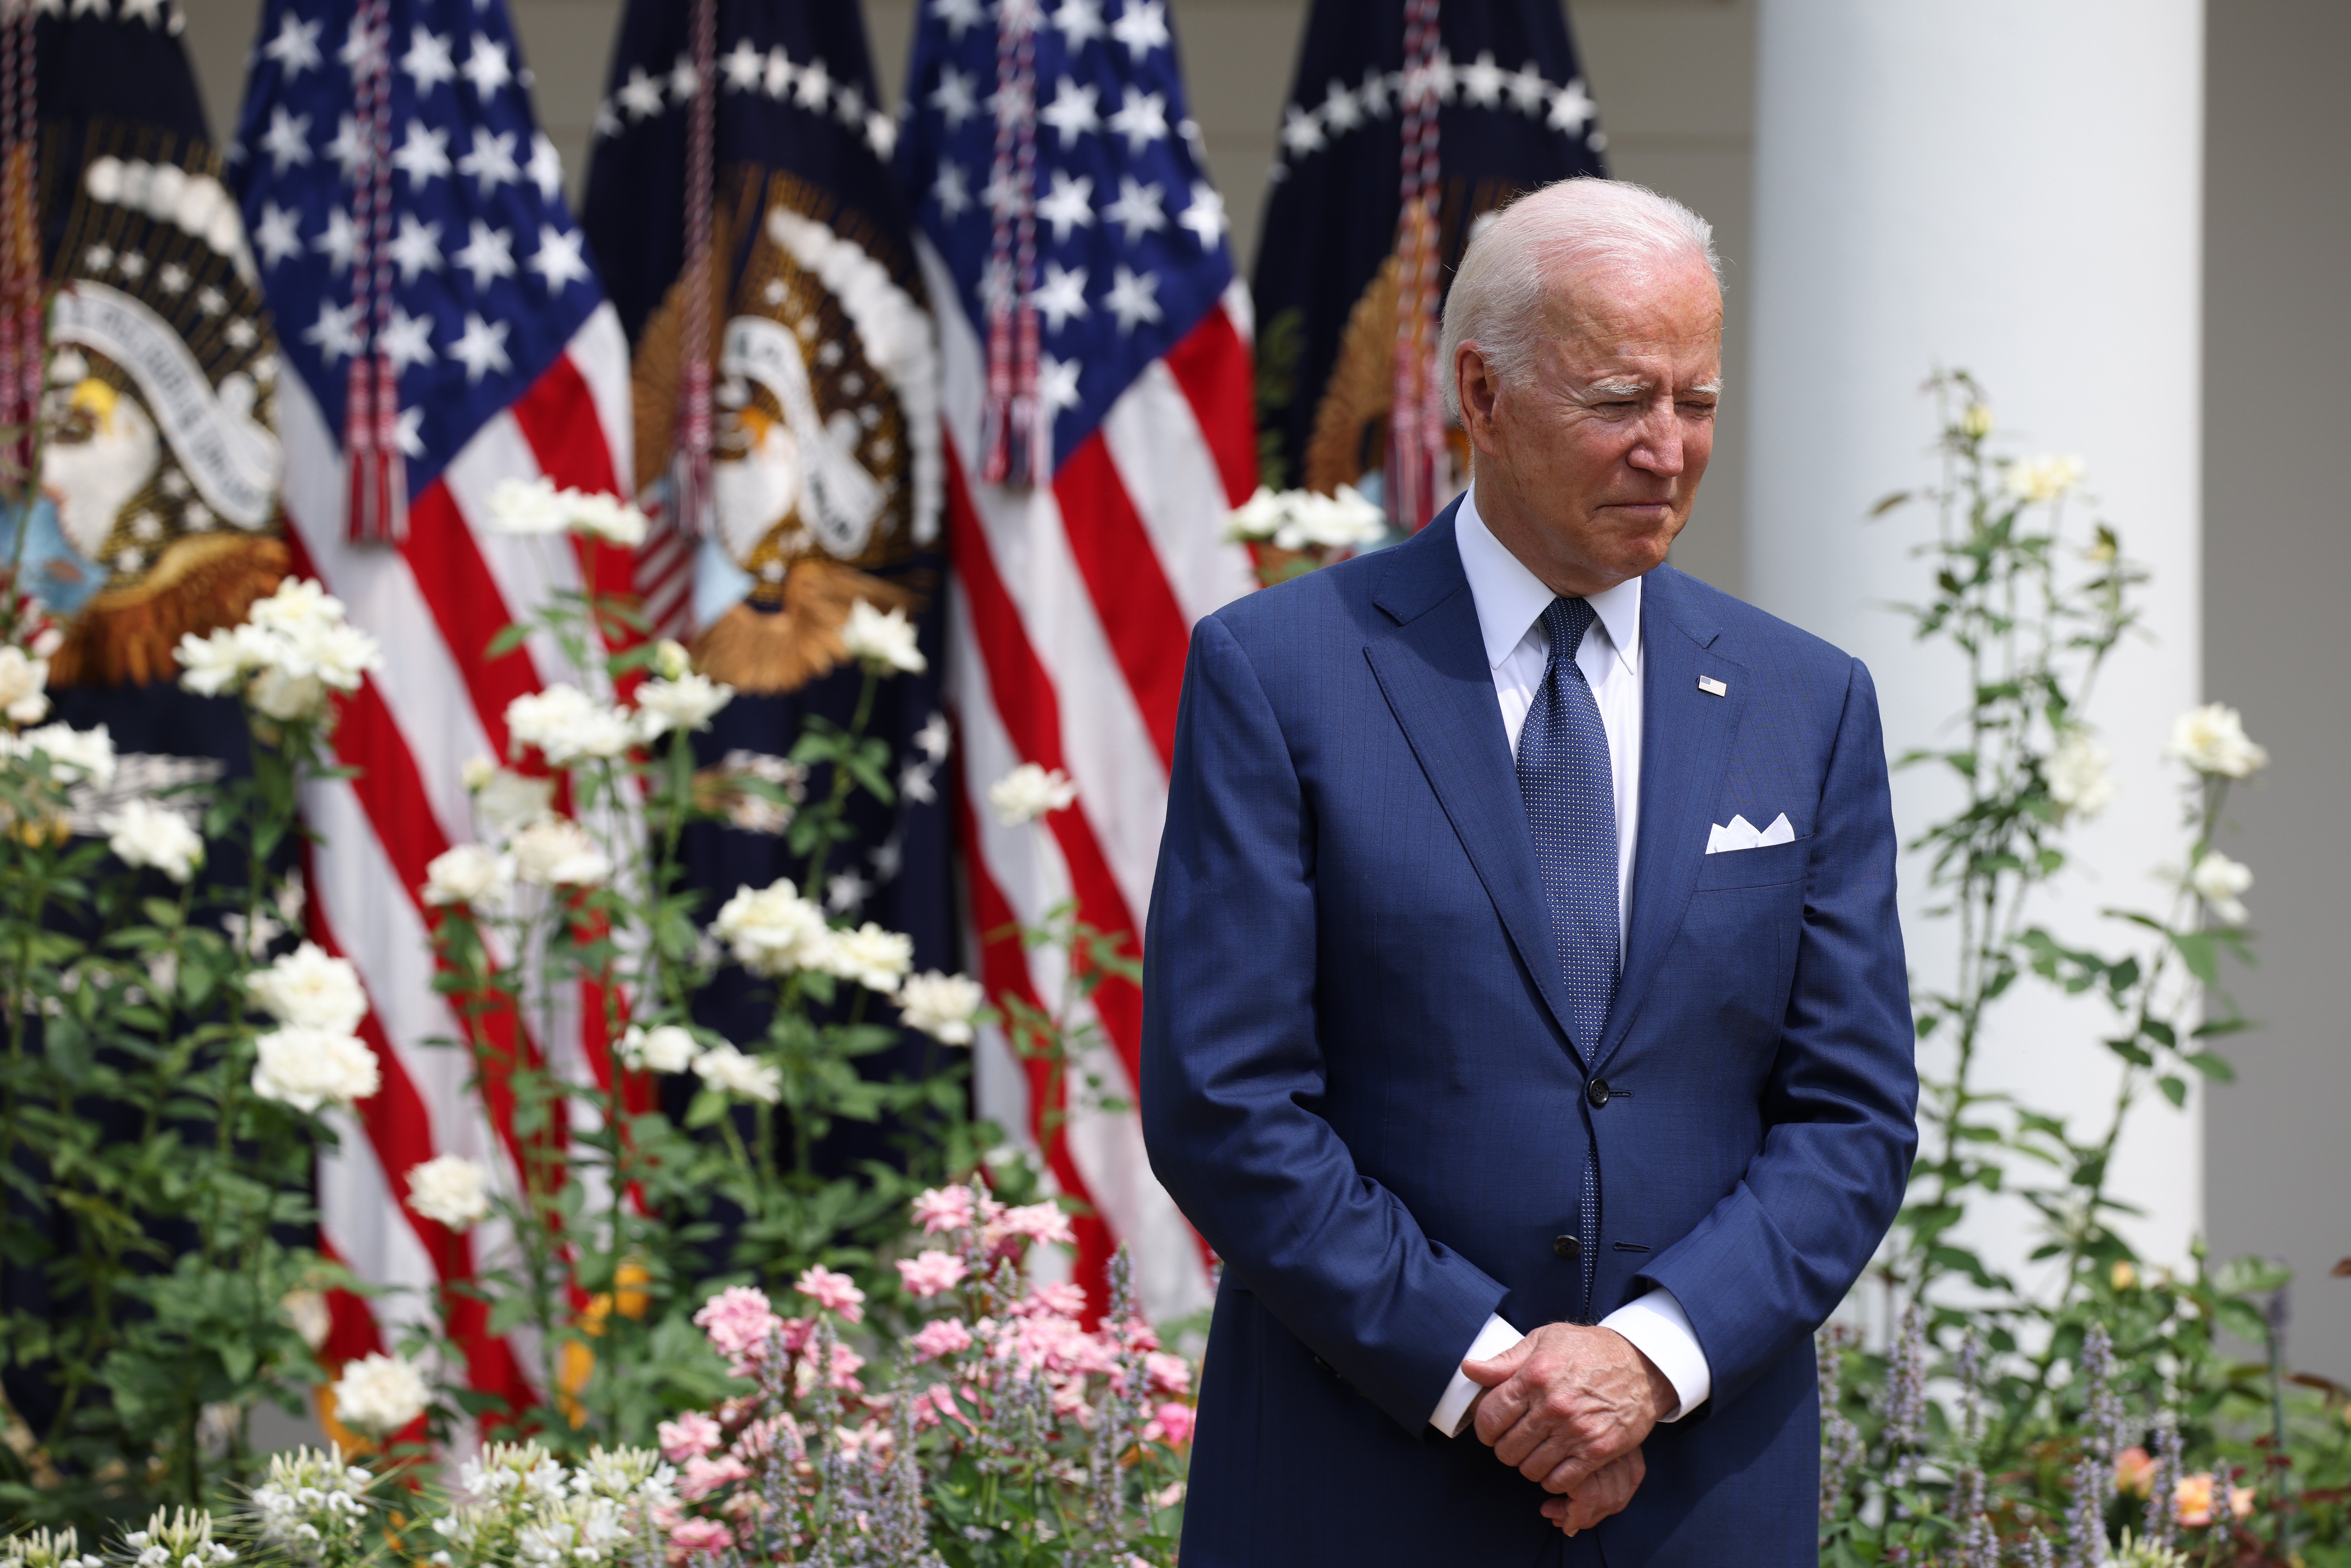 U.S. President Joe Biden listens as Vice President Kamala Harris delivers remarks in the Rose Garden of the White House on July 26, 2021 in Washington, DC. (Photo by Anna Moneymaker/Getty Images)